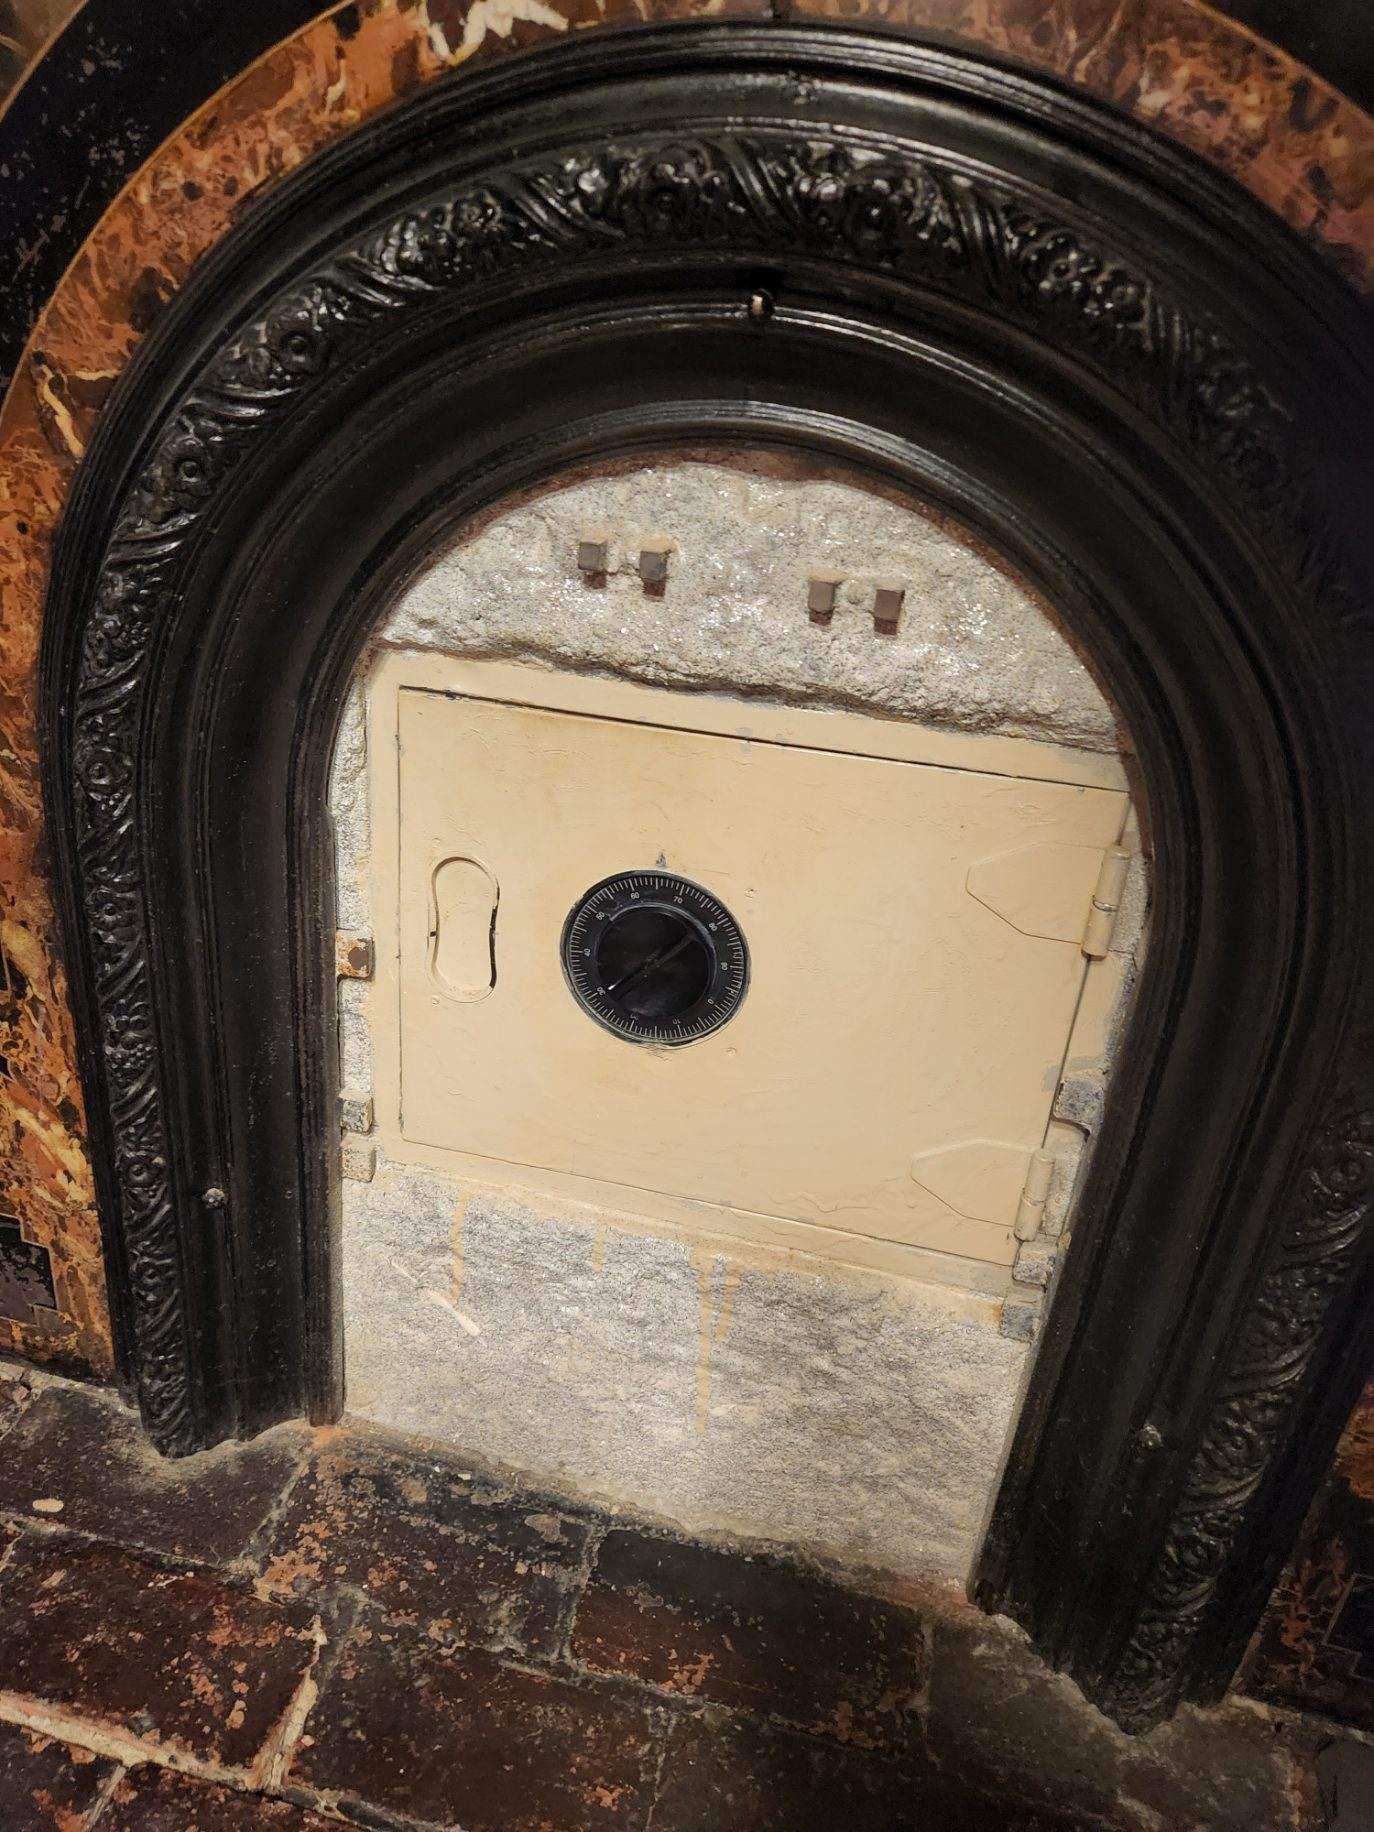 image showing [OC] Roommate found a secret safe in out 1800’s apartment!